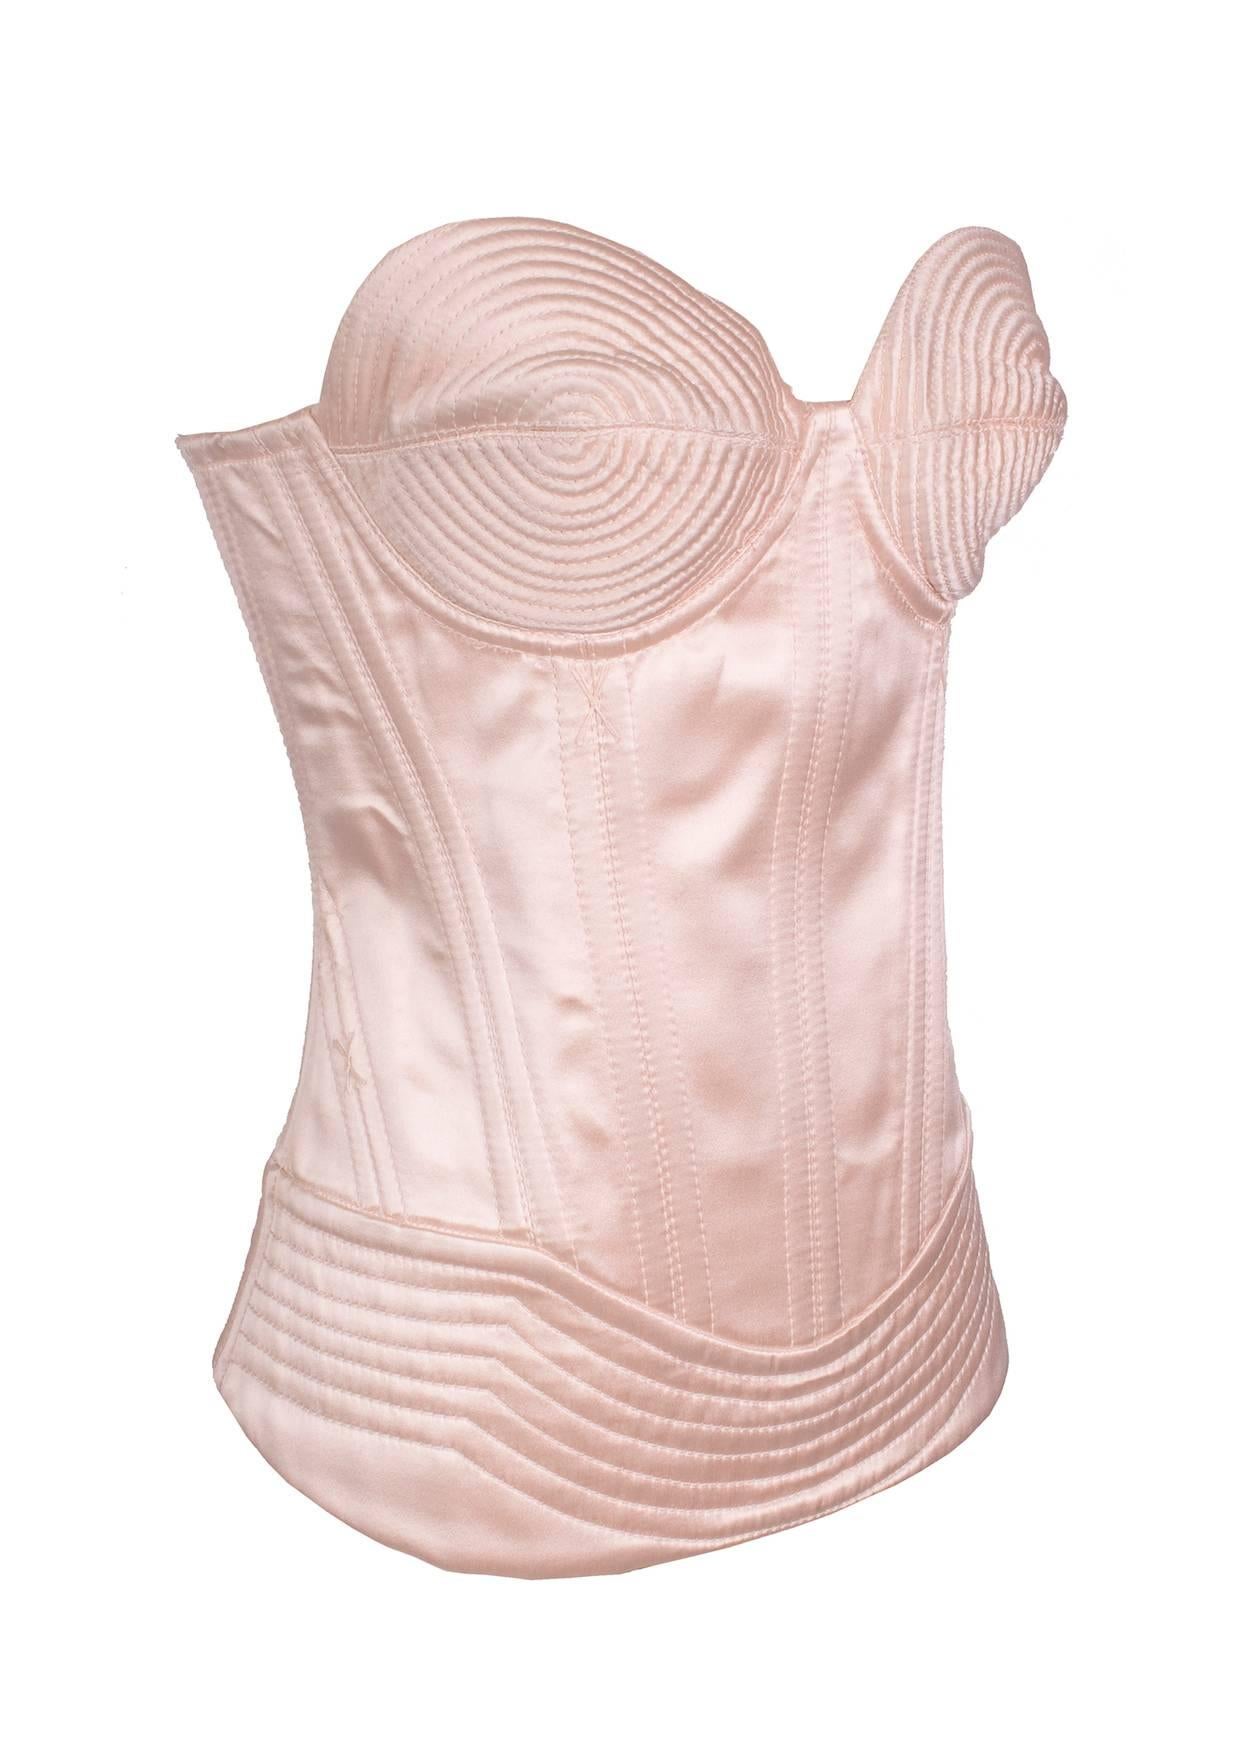 This is a corset by Jean Paul Gaultier c. 1980s.  It features sculptured cone bra cups and laces up in the back.  There is also a side zipper closure.  